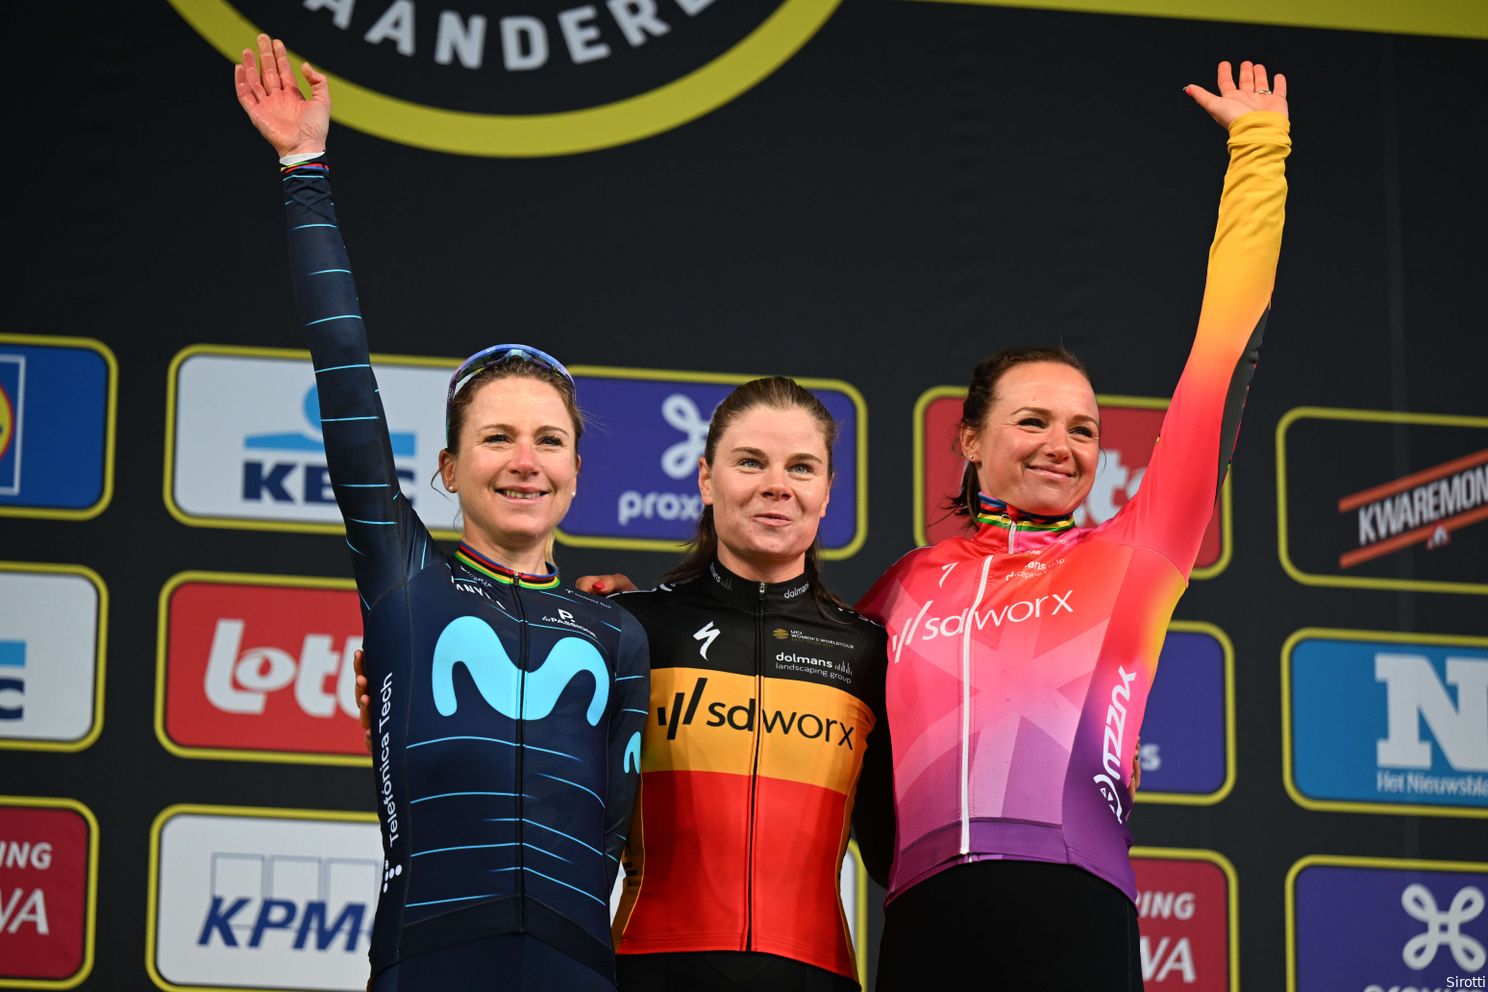 Tour of Flanders 2022: Van den Broeck-Black finished third and could therefore join the podium with winner Lotte Kopecky and runner-up Anemek van Vleuten